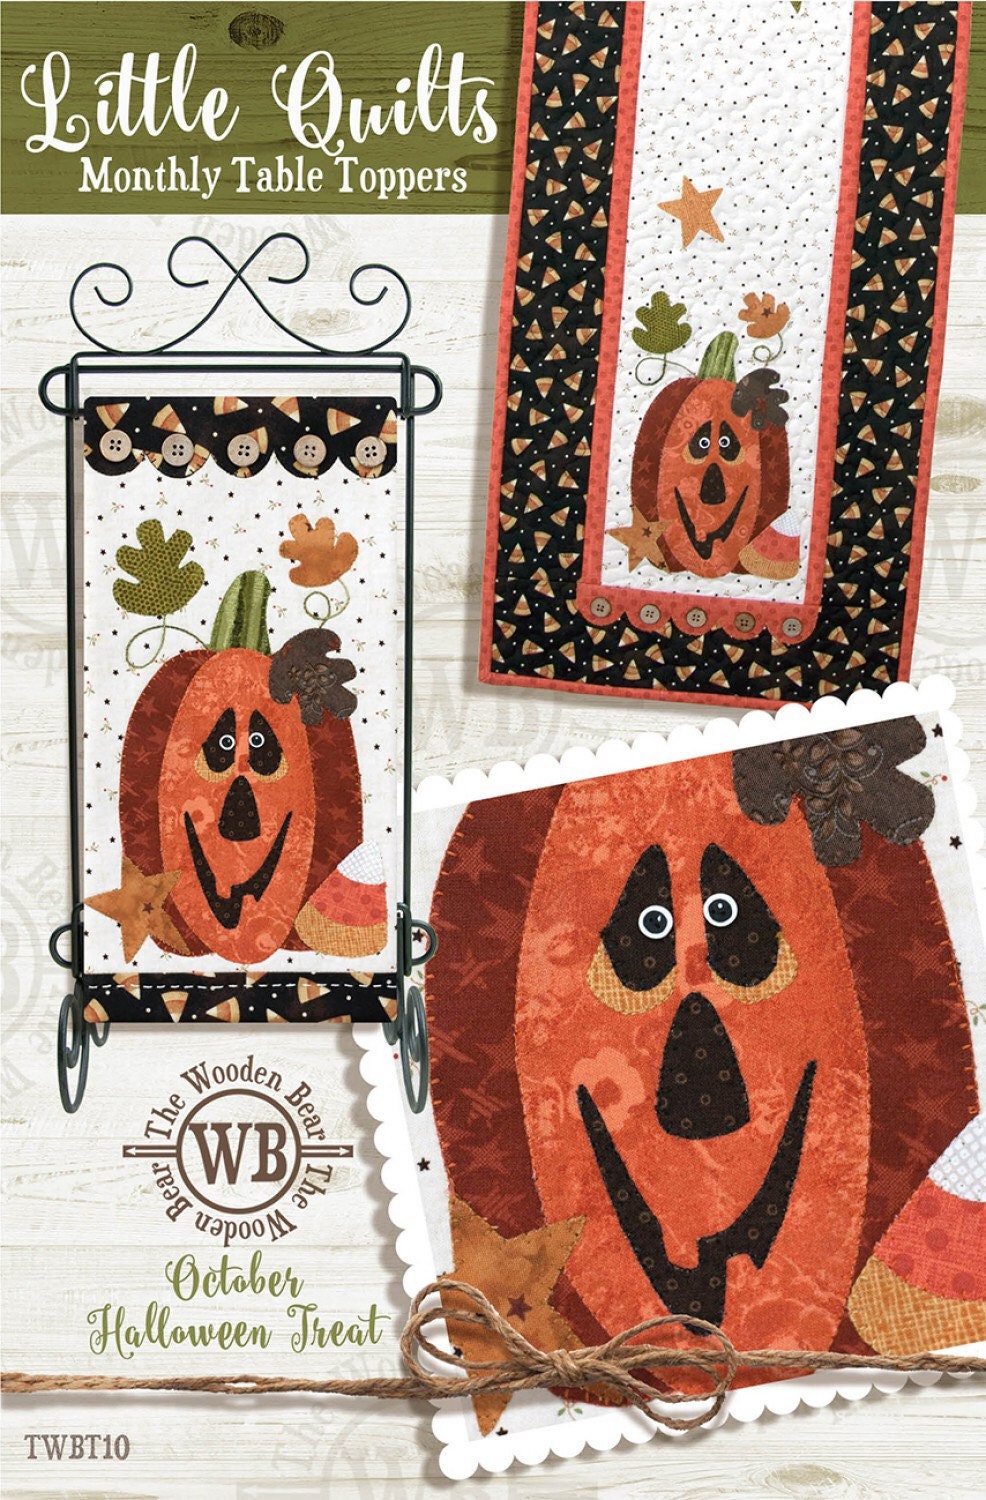 The Wooden Bear October Halloween Treat Mini Quilt Pattern - Little Quilts Series - Buttons Included